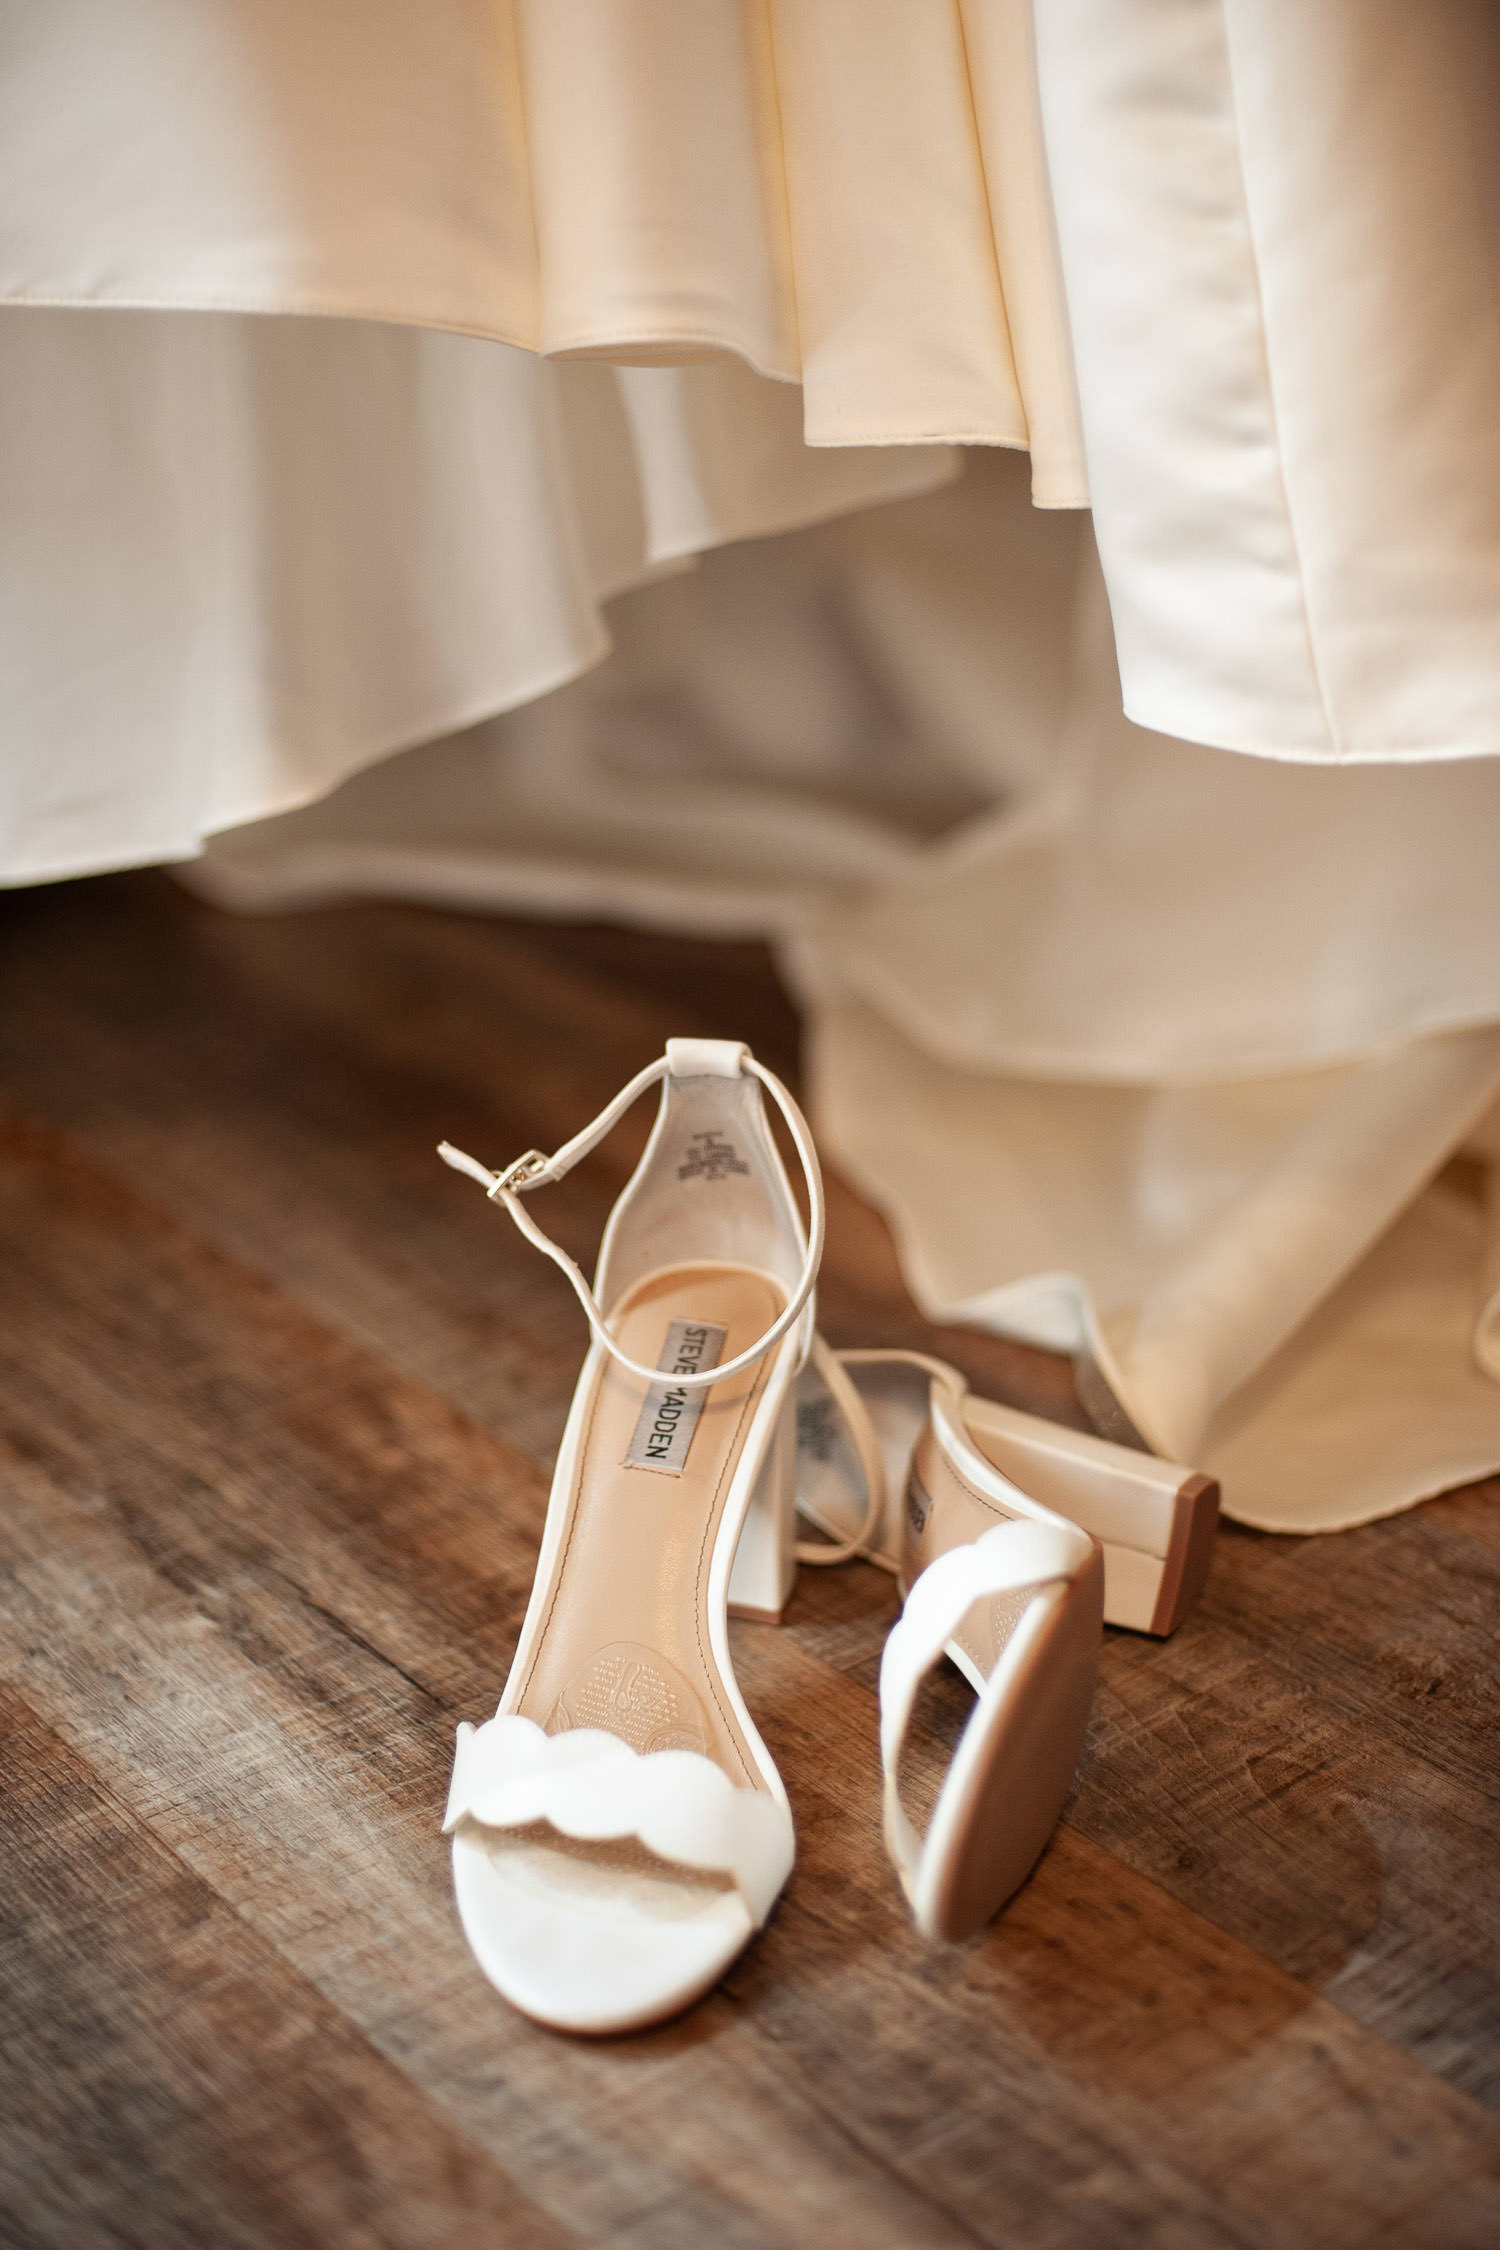 Bridal details before a Creekside Villa wedding captured by Tara Whittaker Photography